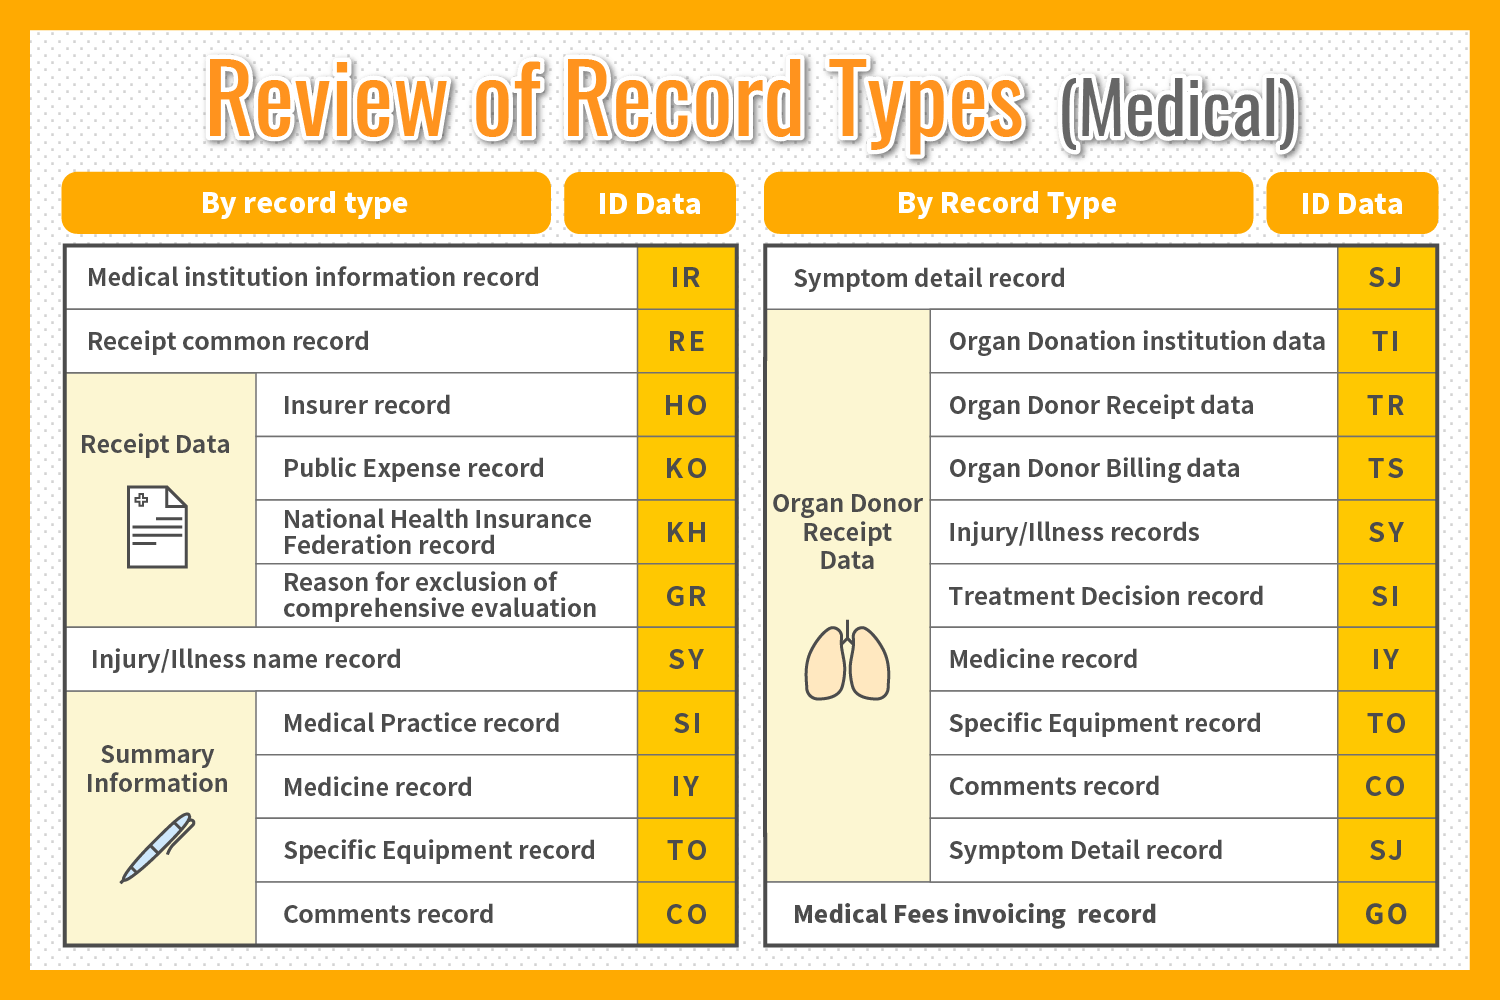 Review of Record Types(Medical)